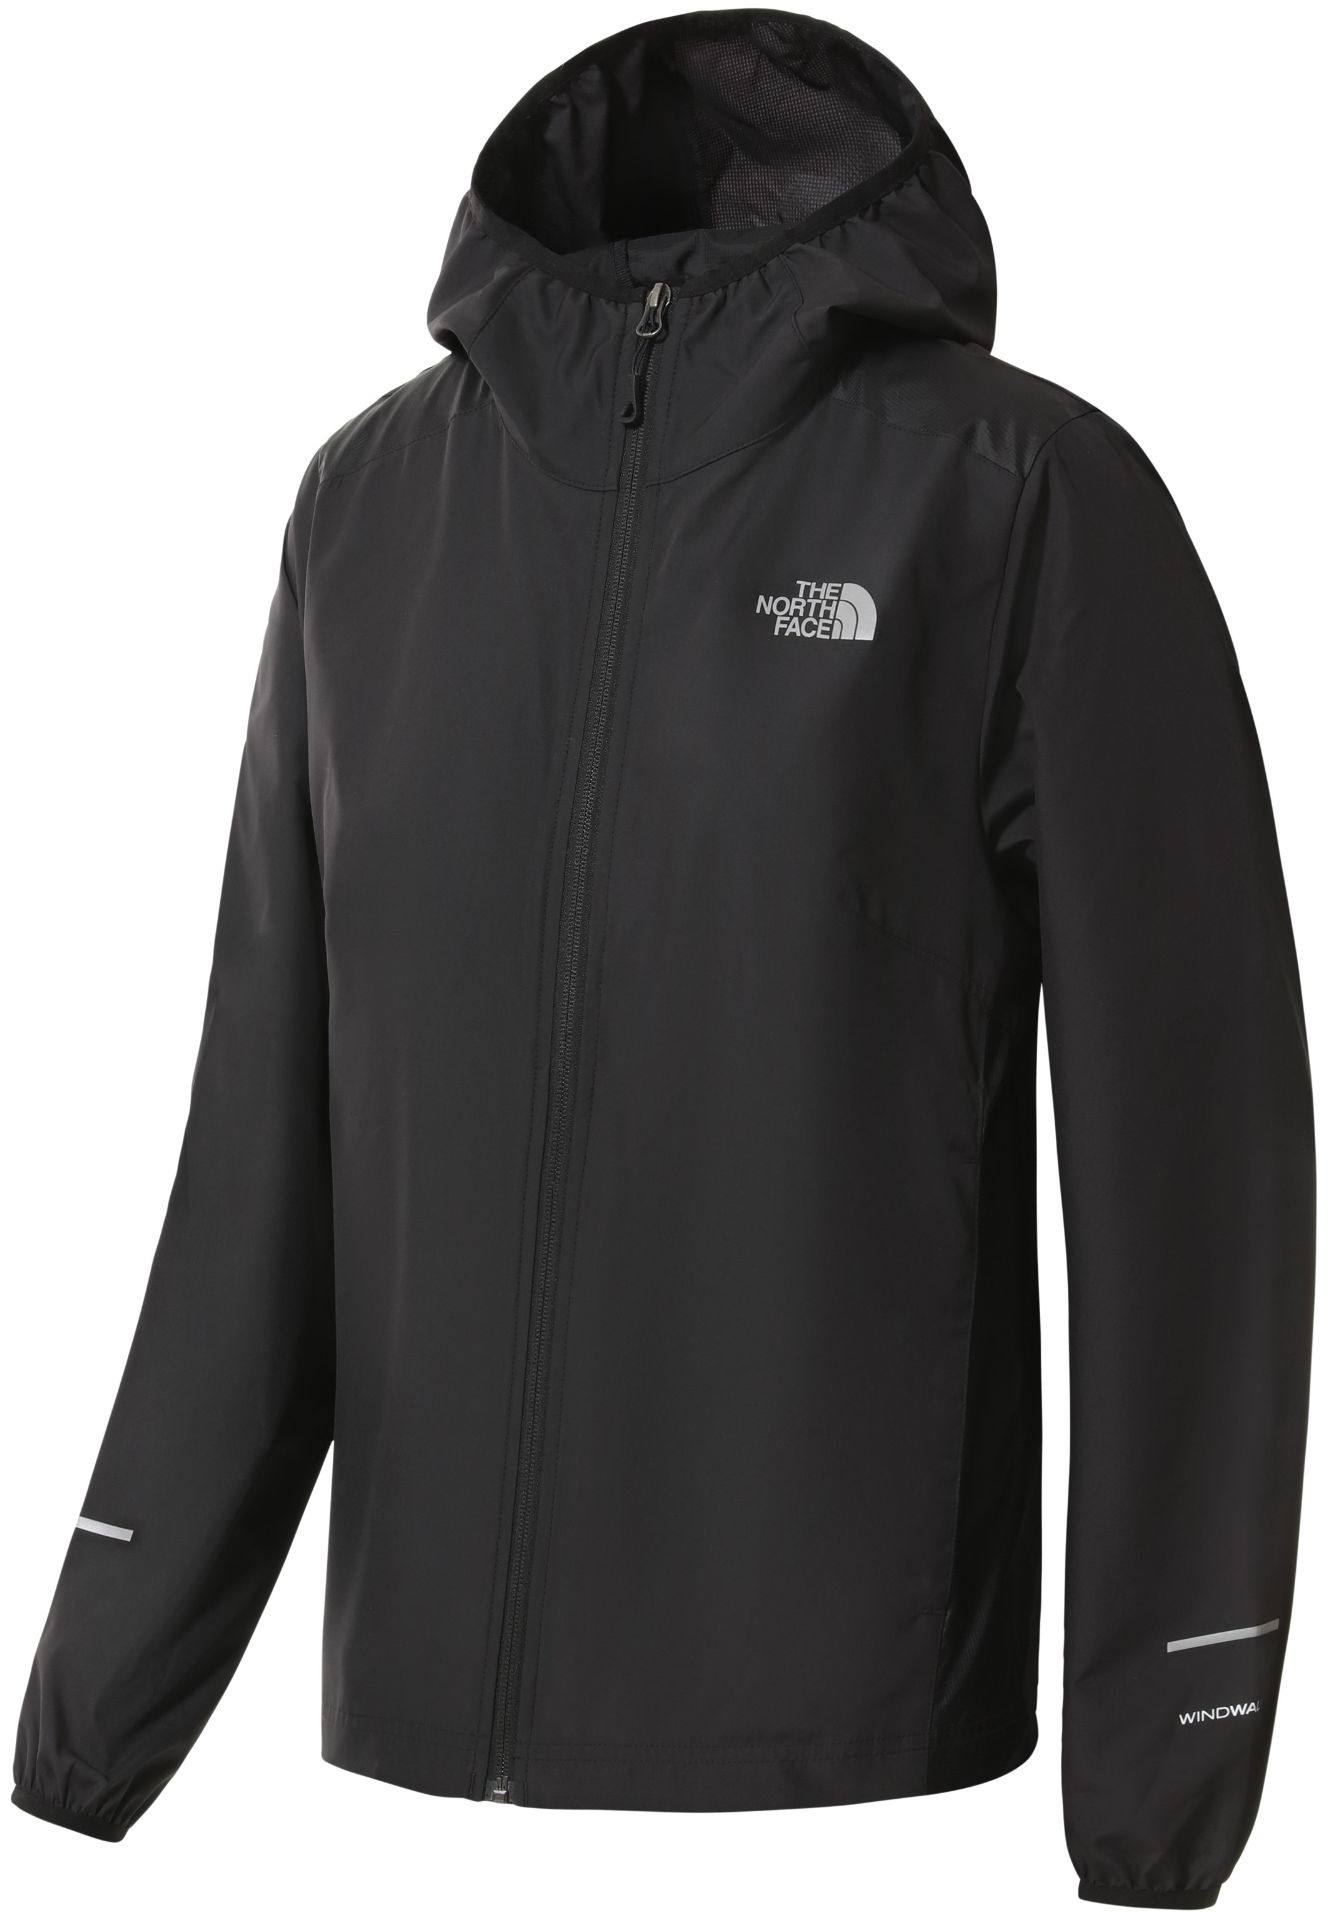 The North Face Women’s Running Wind Jacket Black L